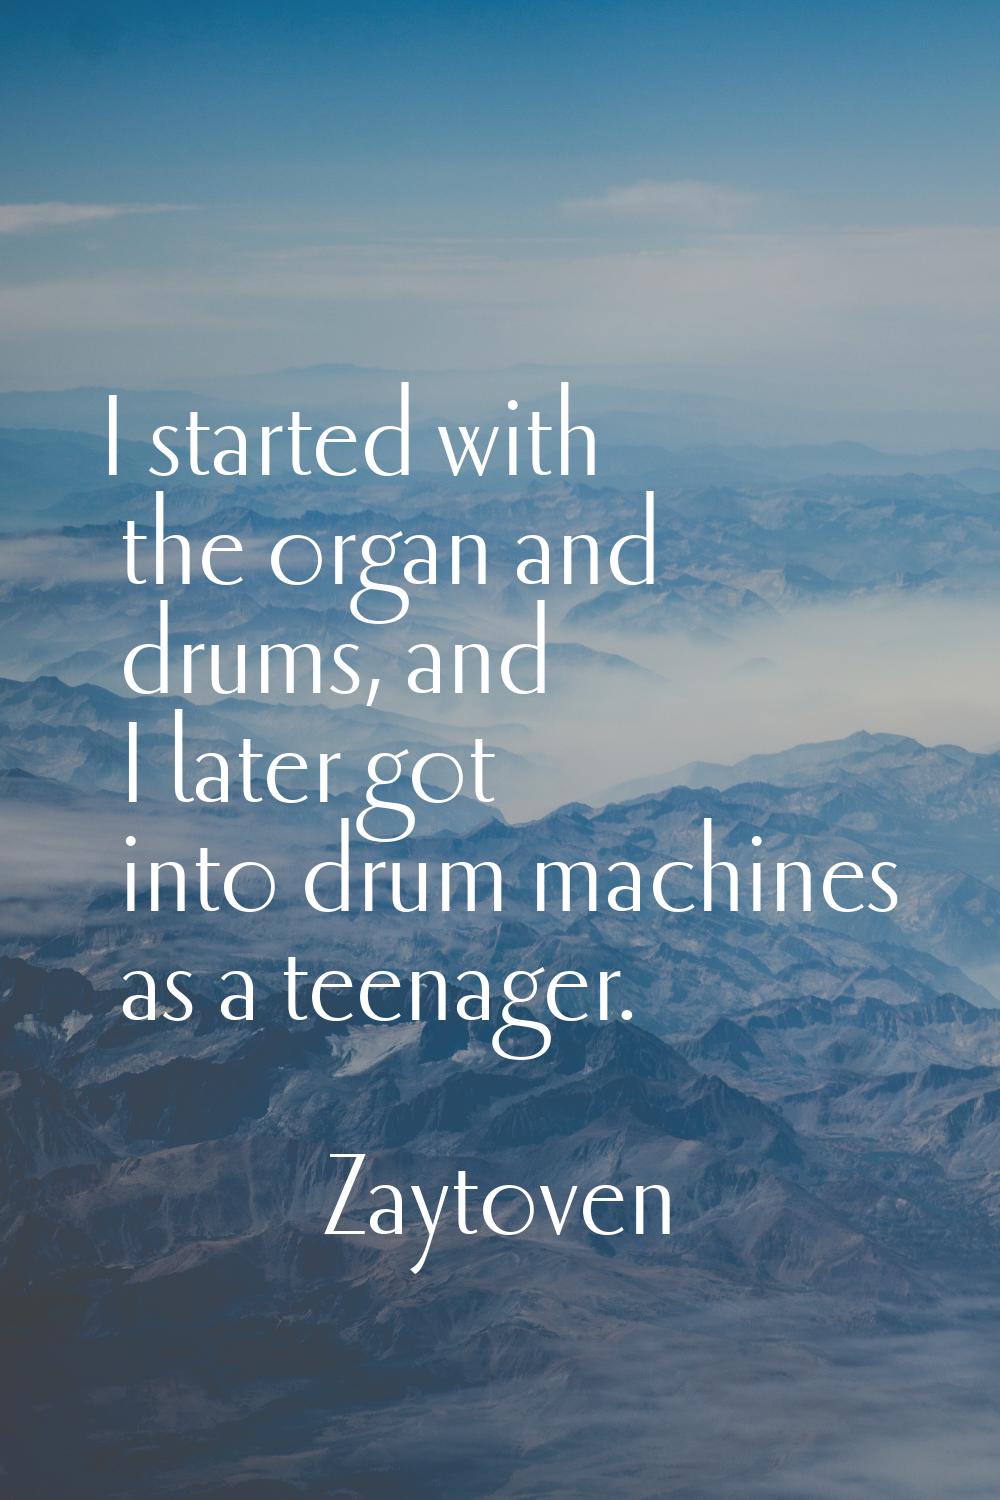 I started with the organ and drums, and I later got into drum machines as a teenager.